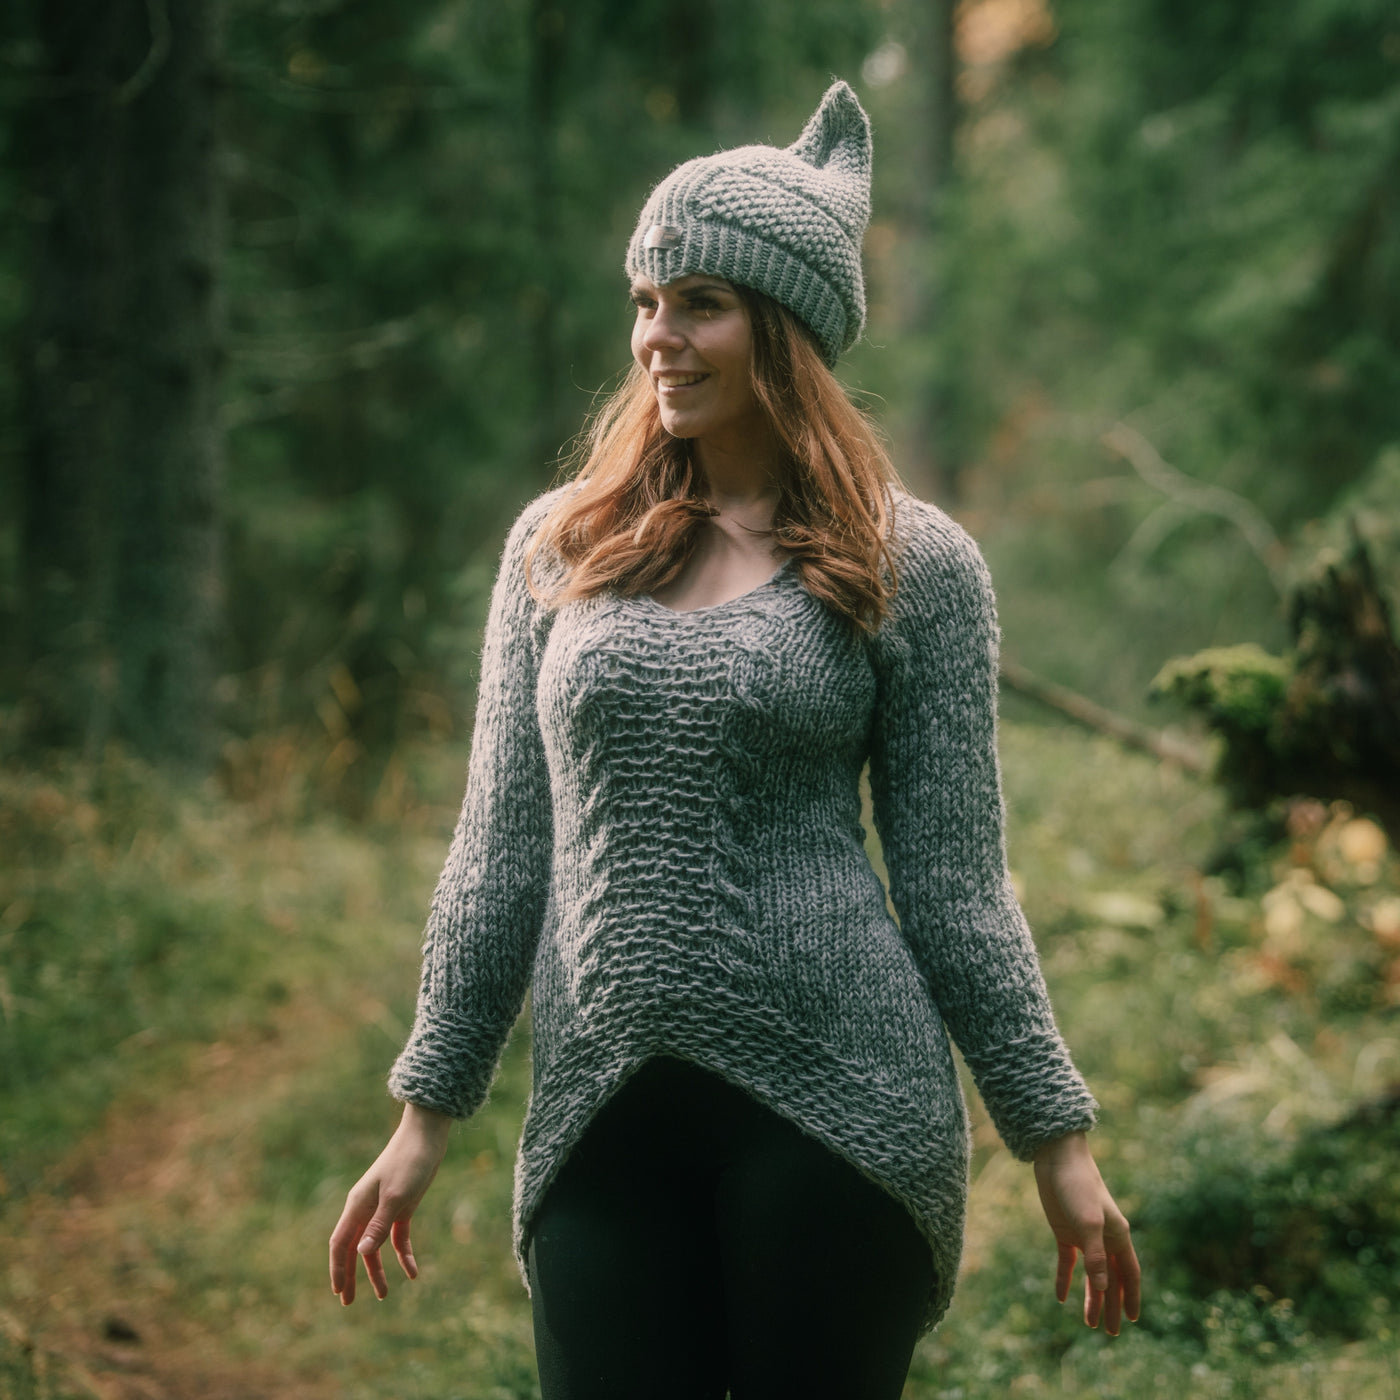 Handmade knitted dreamy grey cocoon sweater